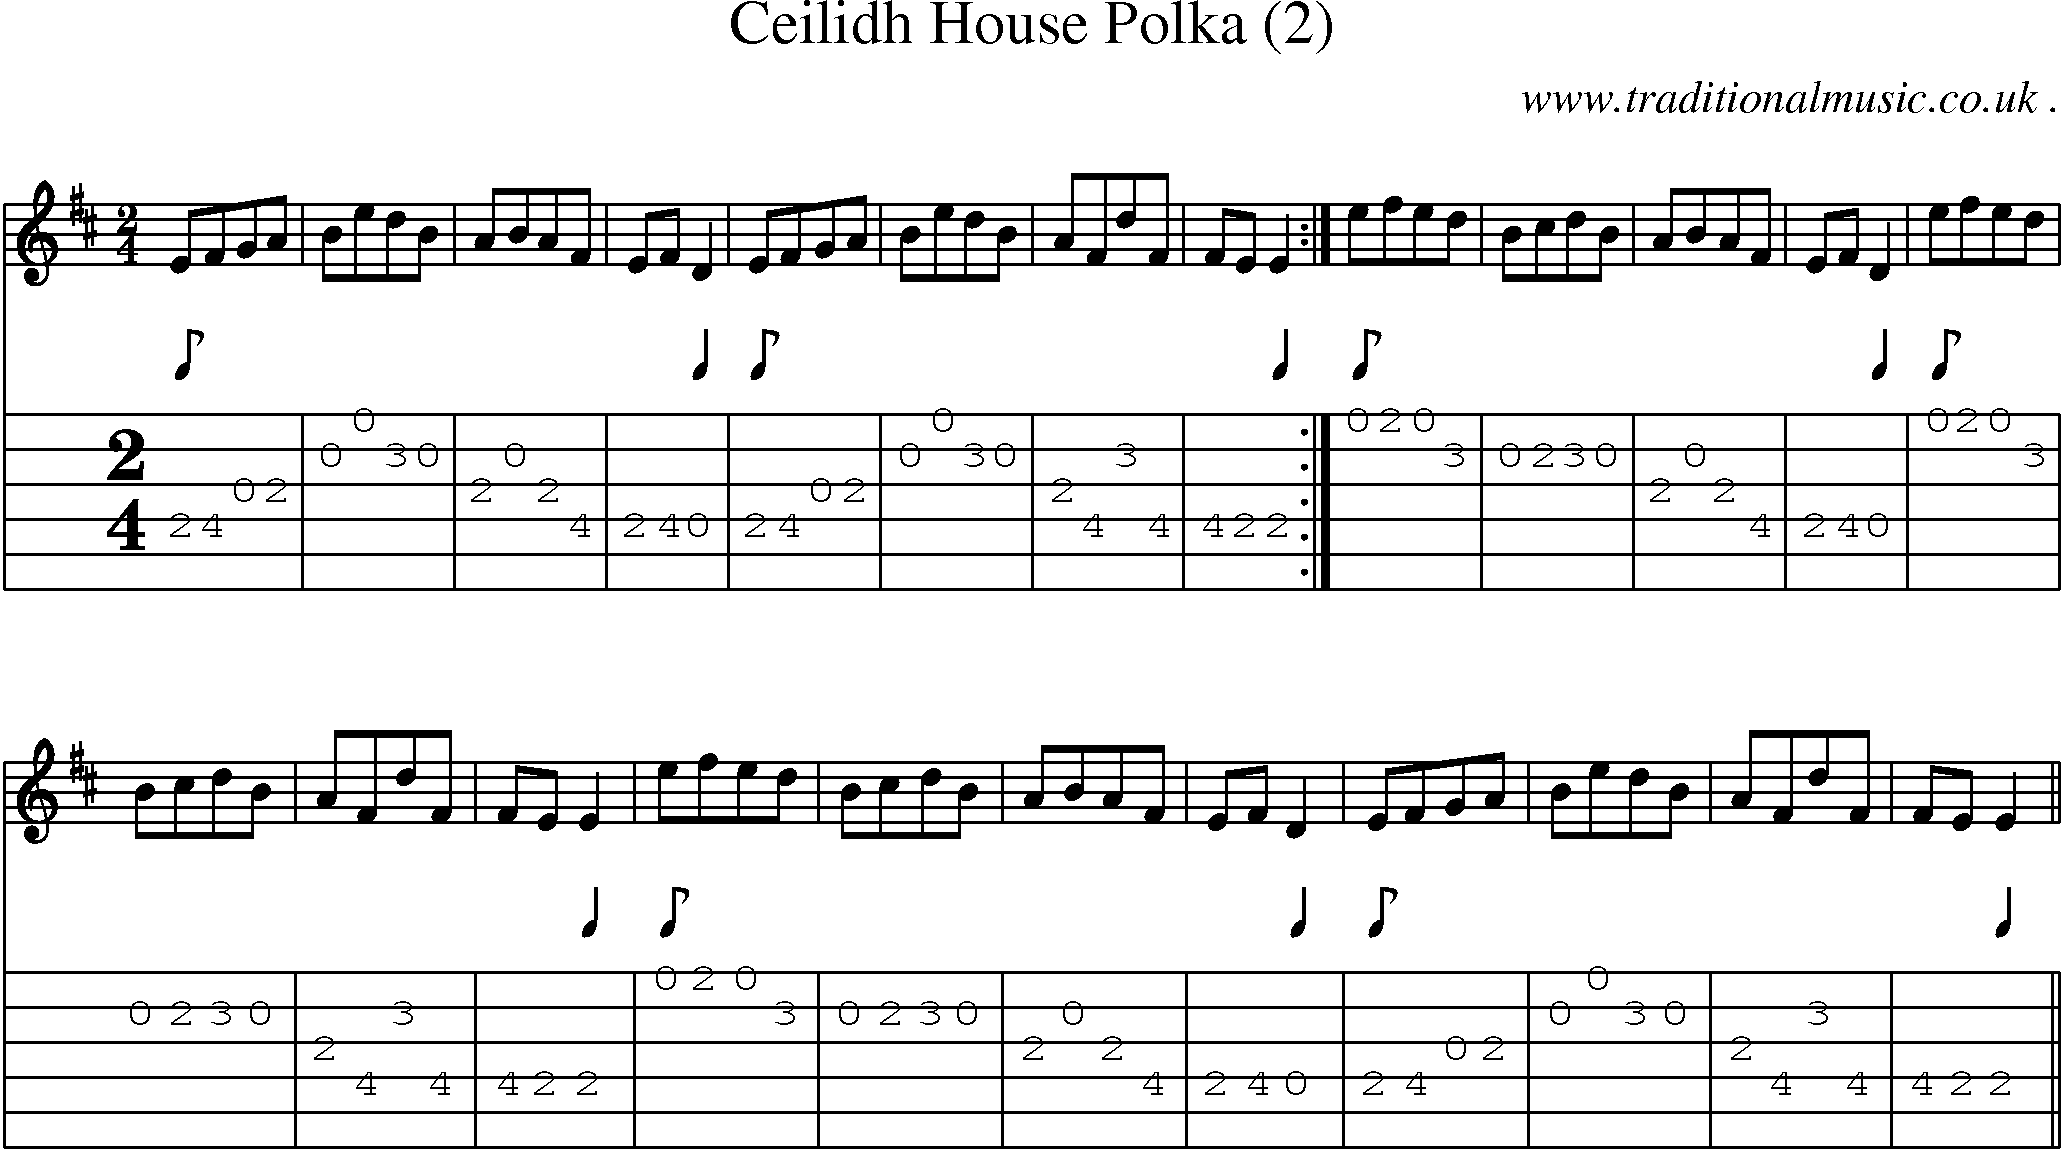 Sheet-Music and Guitar Tabs for Ceilidh House Polka (2)